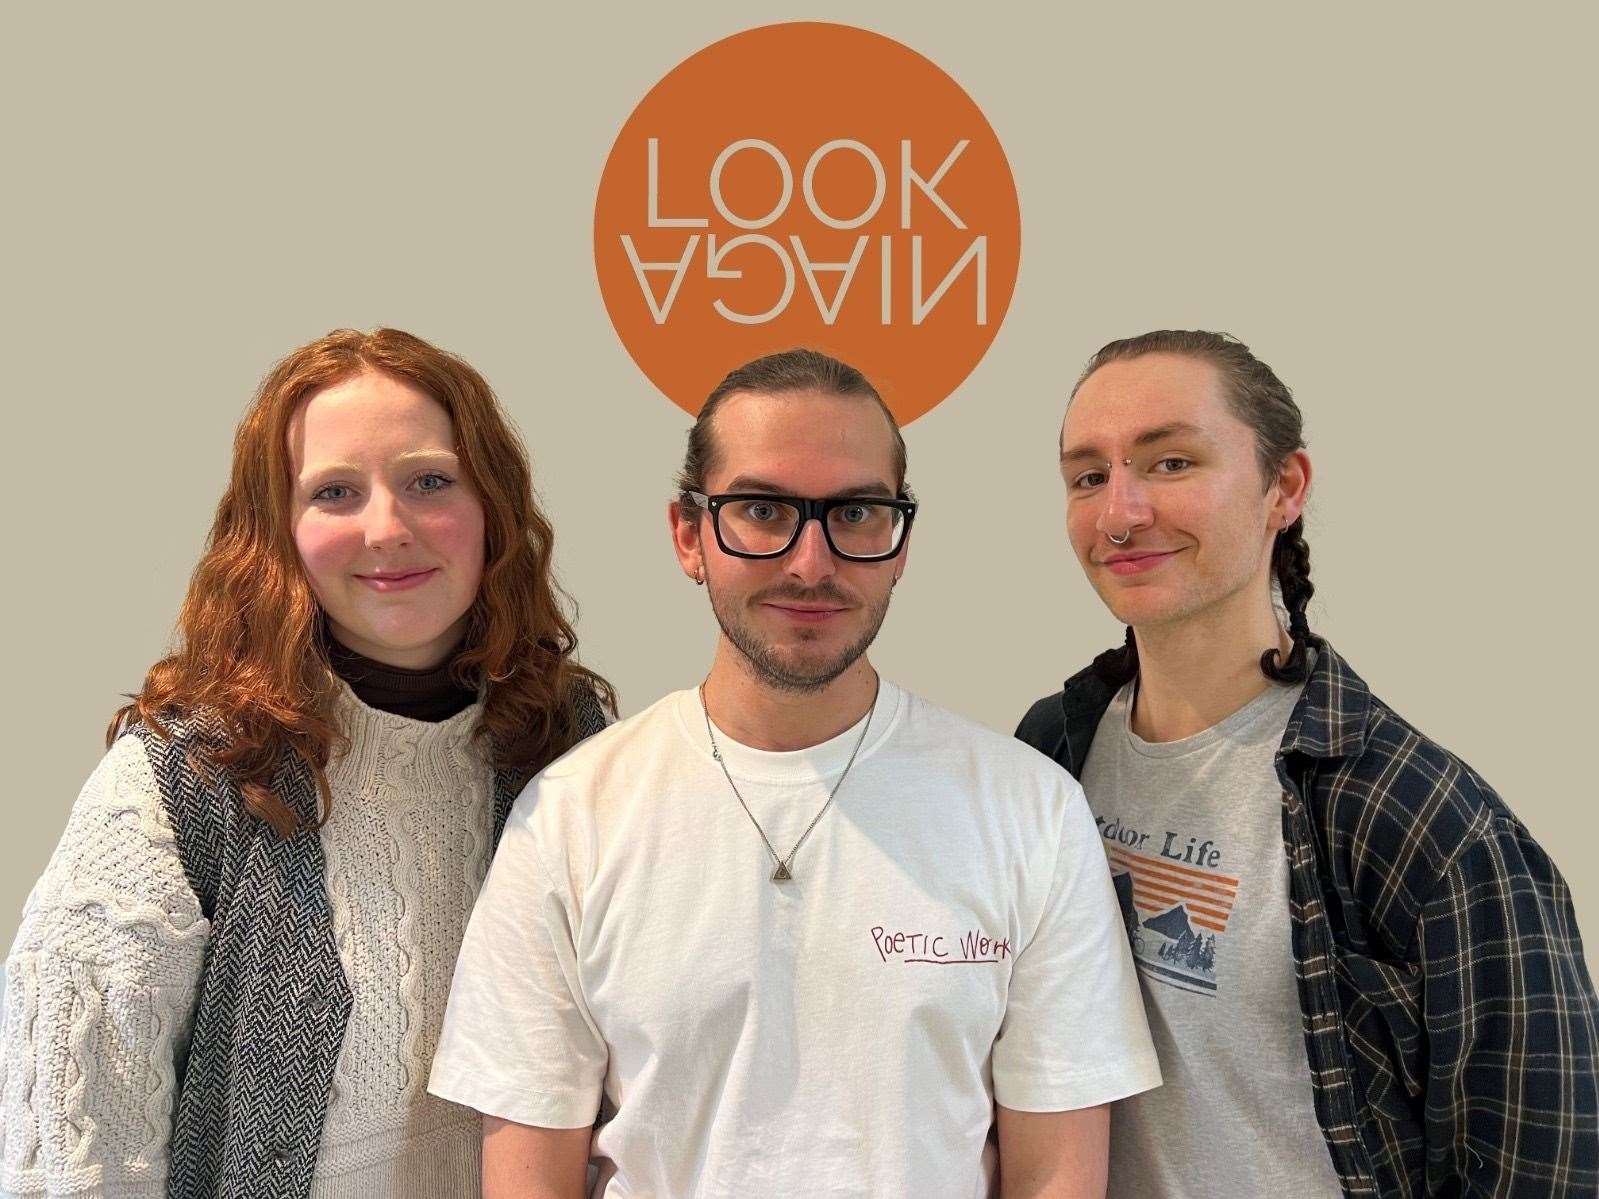 Gray’s alumnae and former Artist in Residence, Claudia Sneddon; Bart Grabski from Look Again; and Joe Morris, also a Gray’s alumnae and former Artist in Residence.